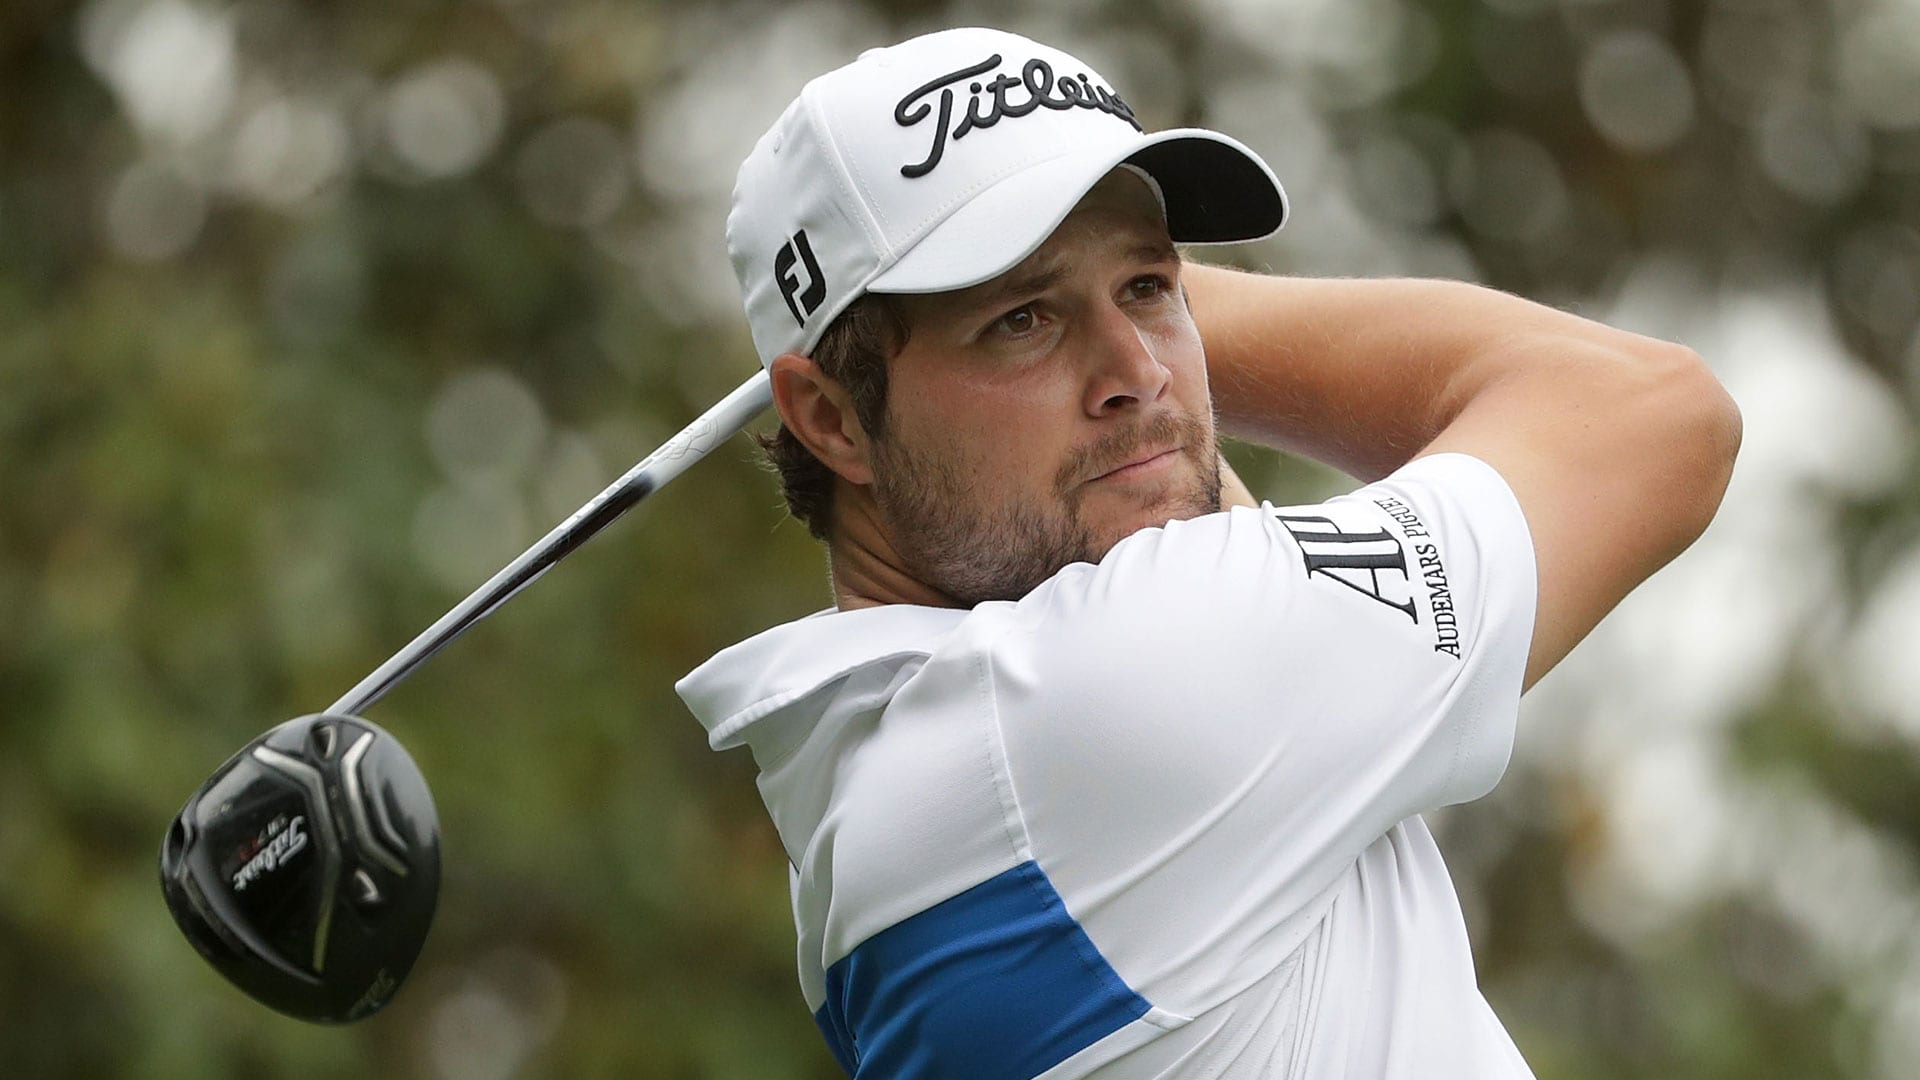 Peter Uihlein -- Are His PGA Tour Struggles Behind Him?